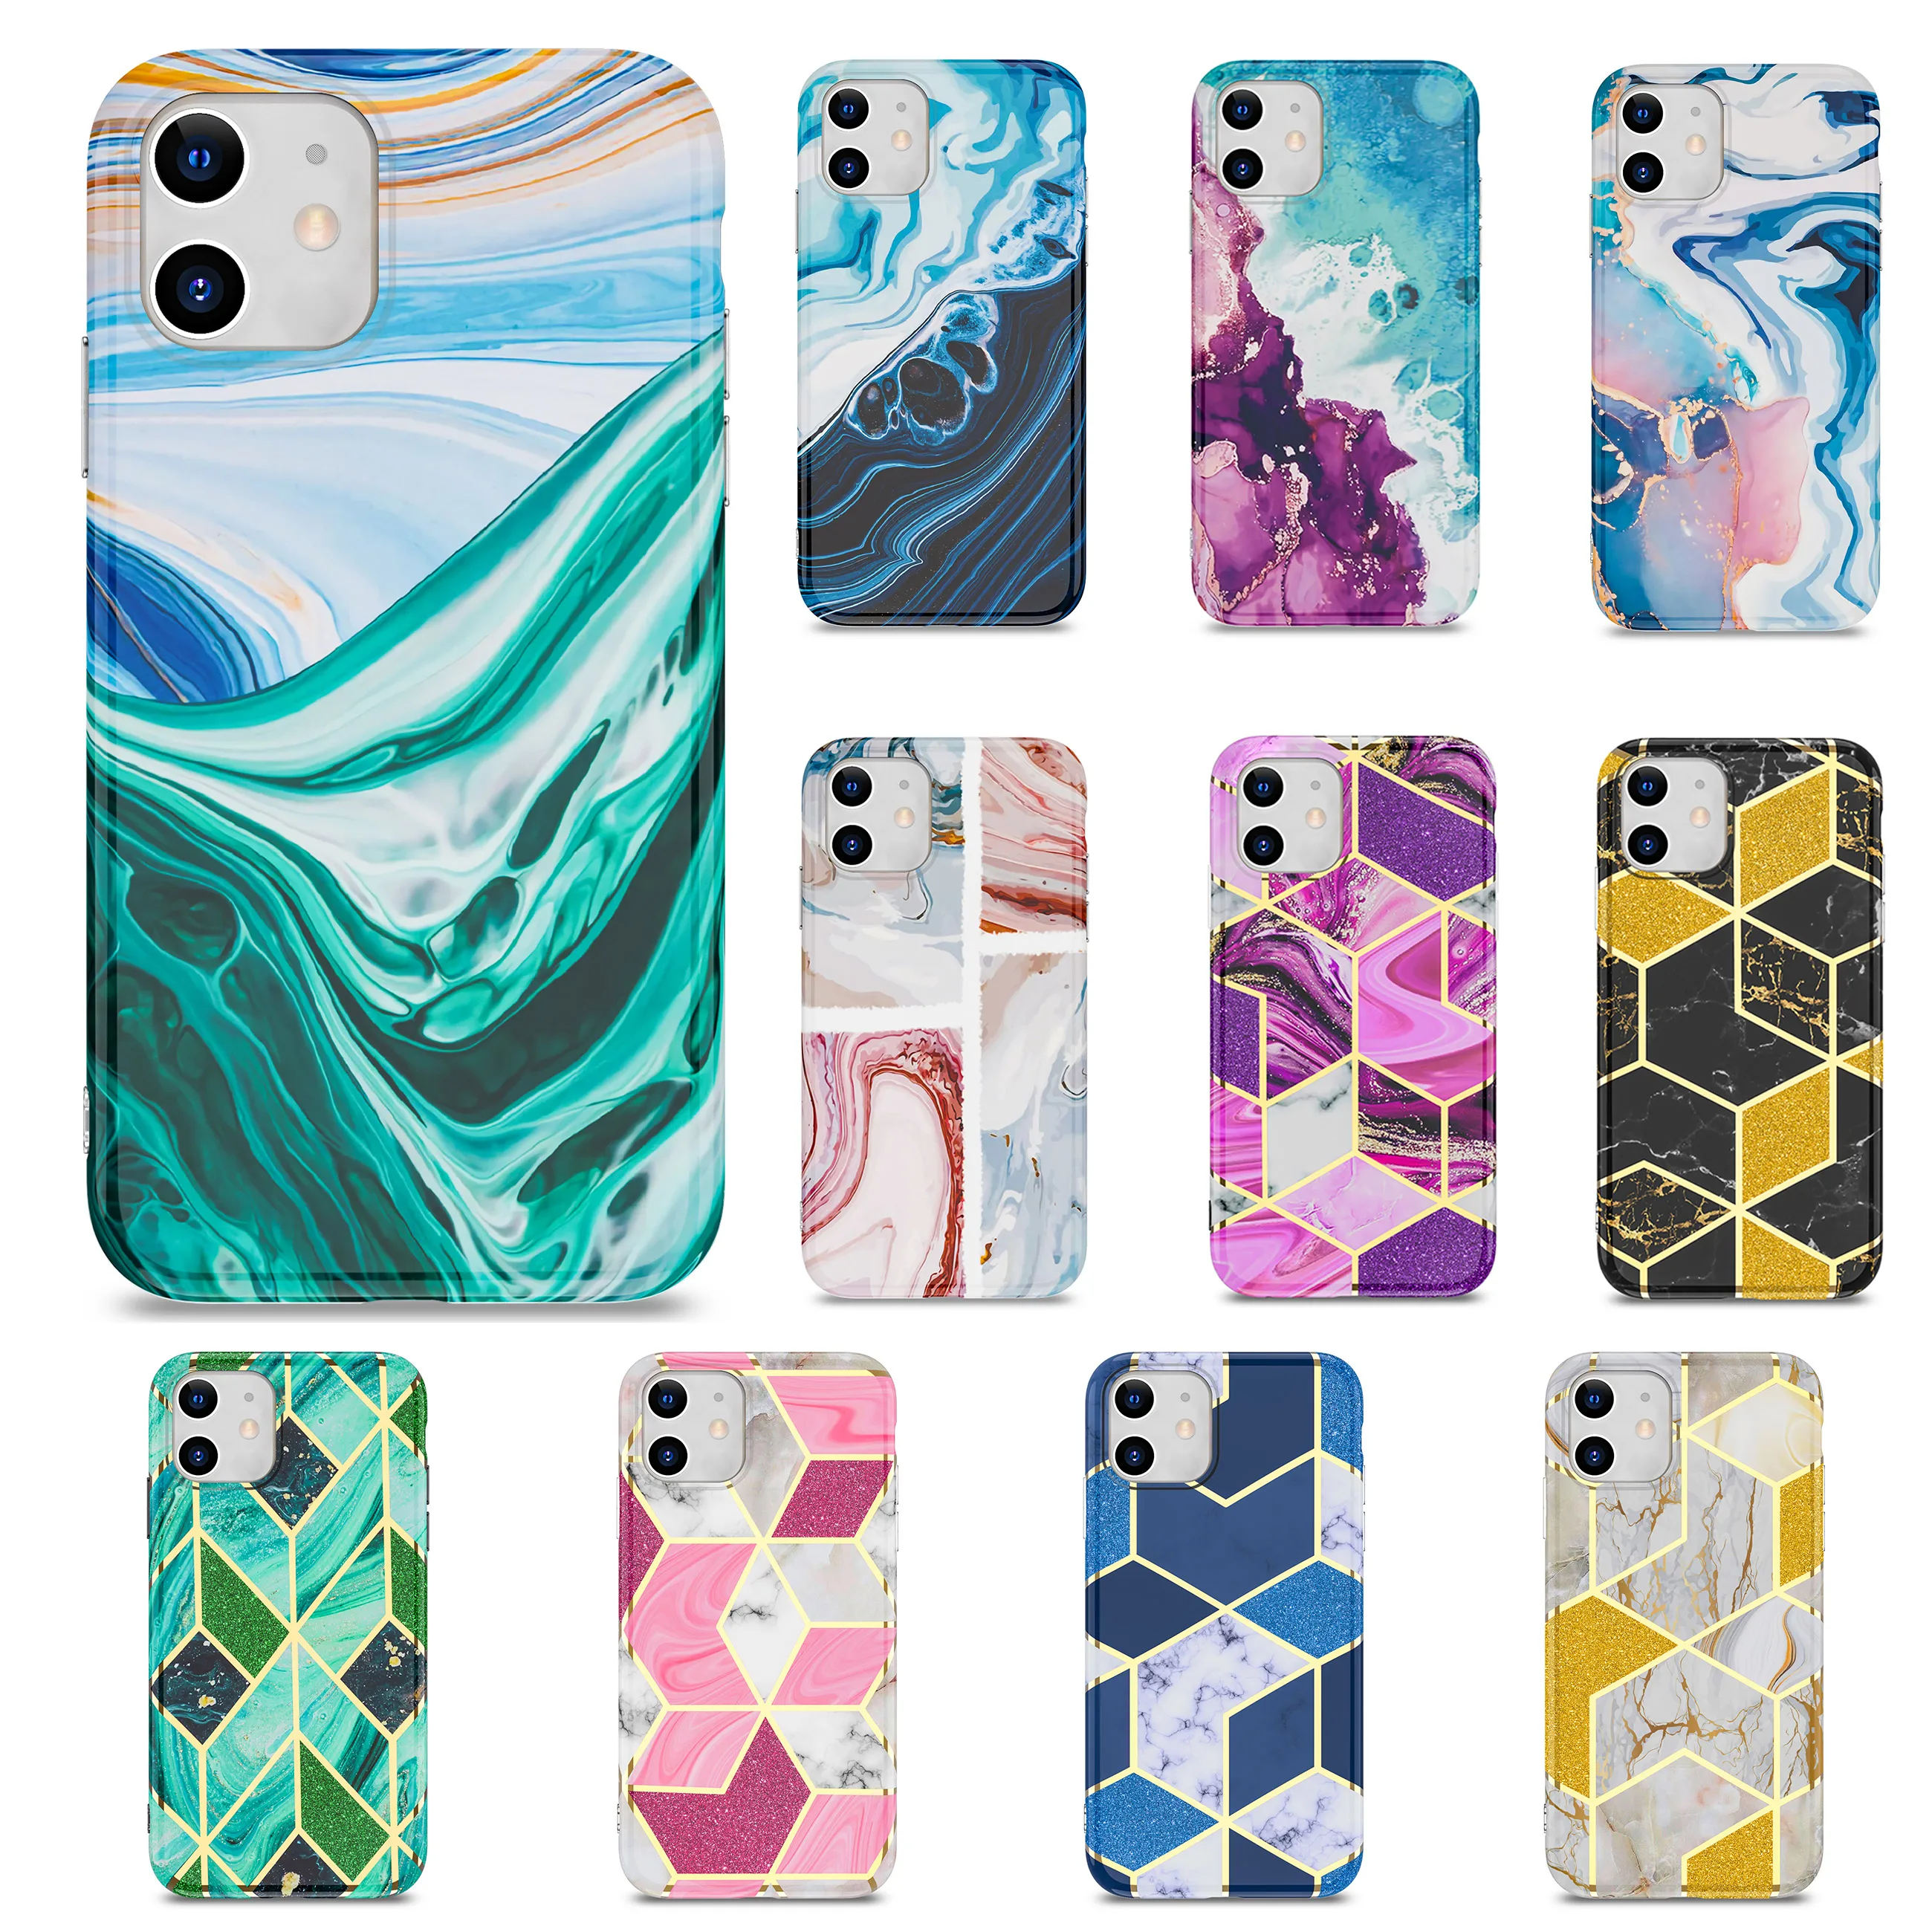 

Fashion Geometric Stripe Cover Marble Phone Case For Iphone 12 11 X XR Xsmax 6 7 8 Plus, Multiple colors